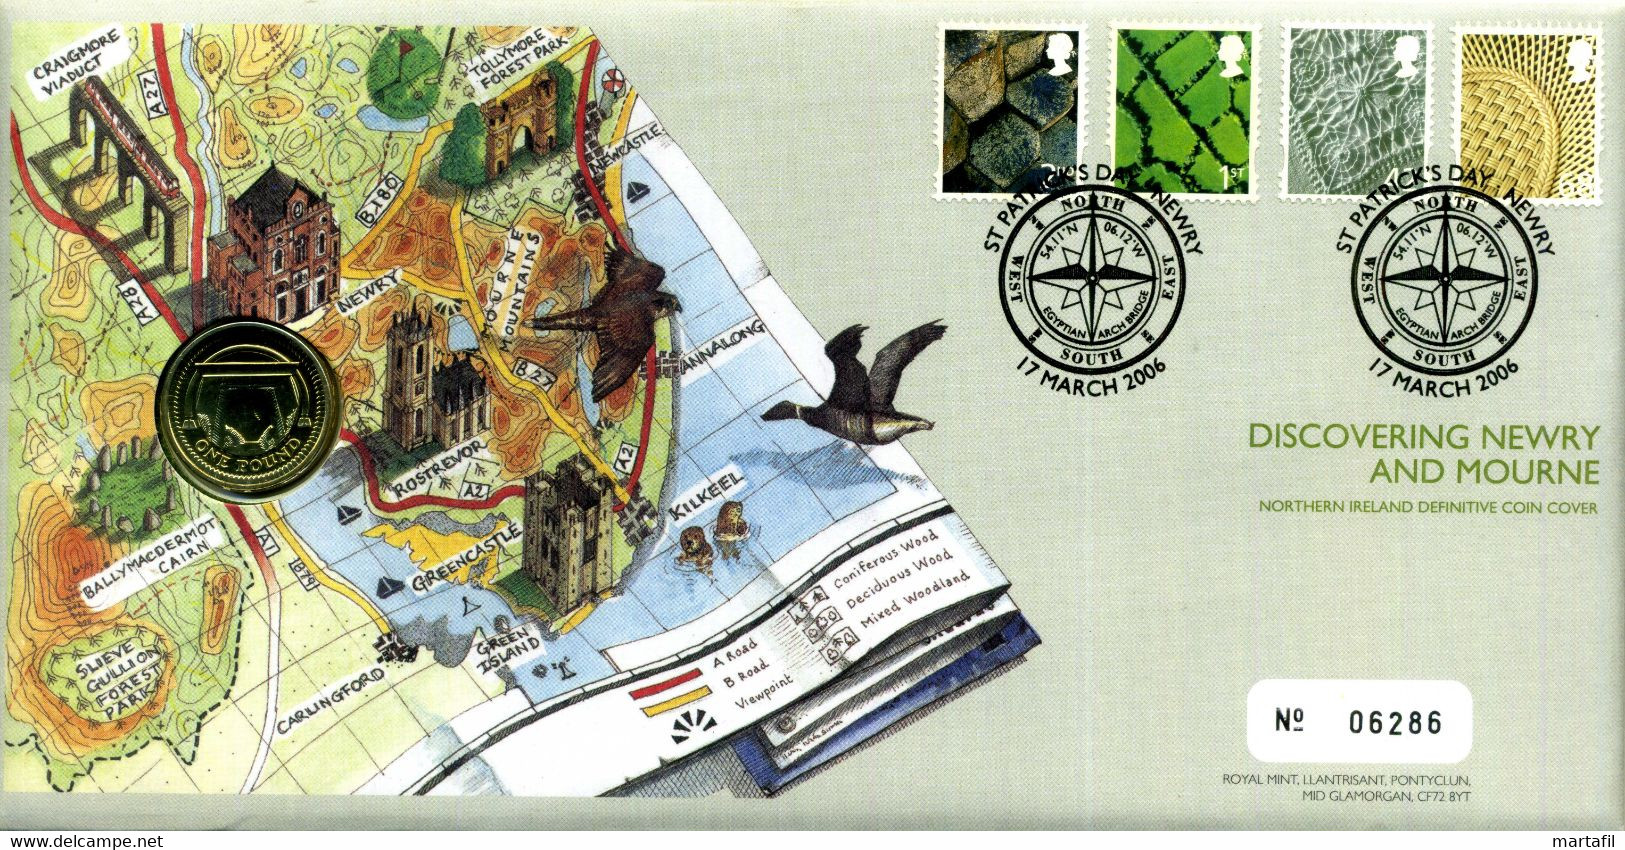 Royal Mail FDC "Discovering Newry And Mourne" Northern Ireland Definitive Coin Cover - Geography